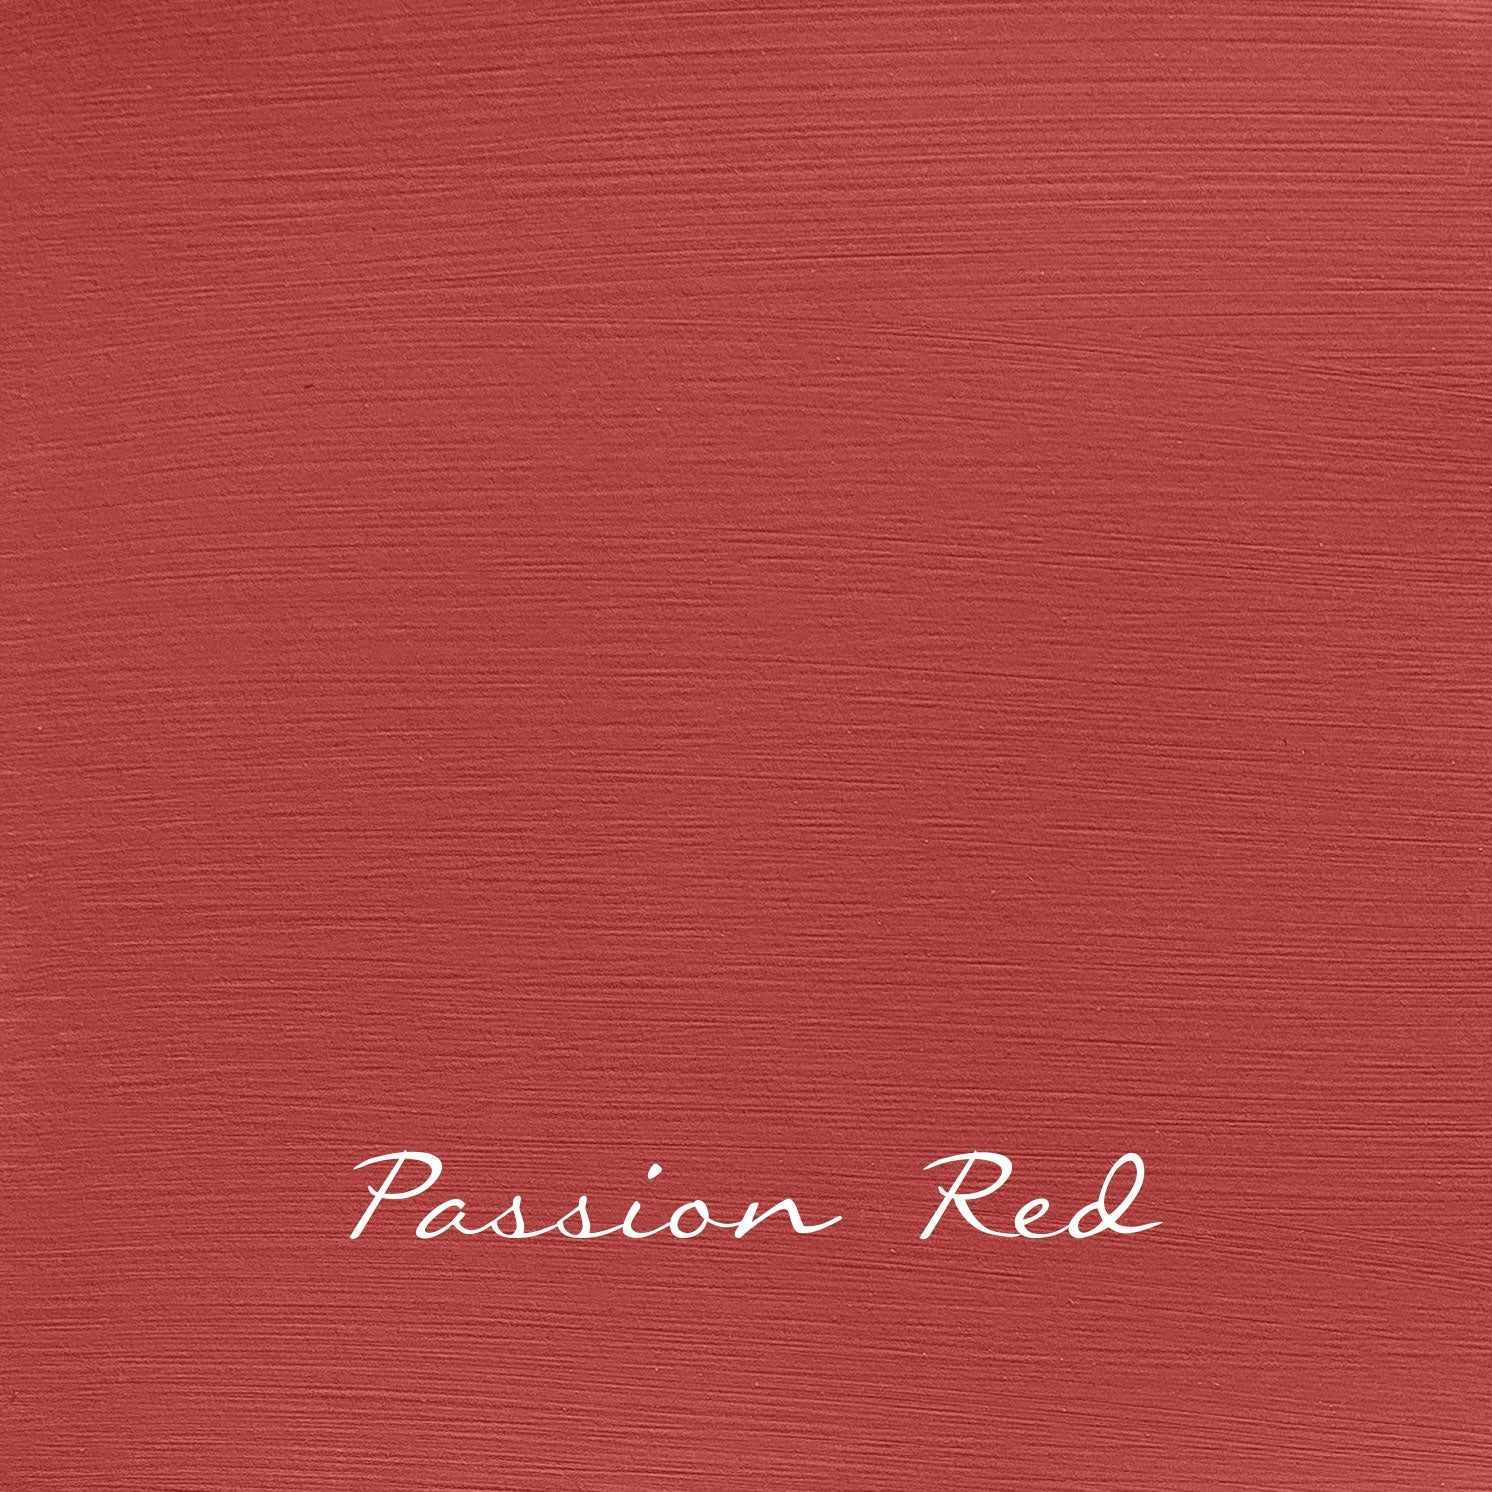 Vintage Passion Red